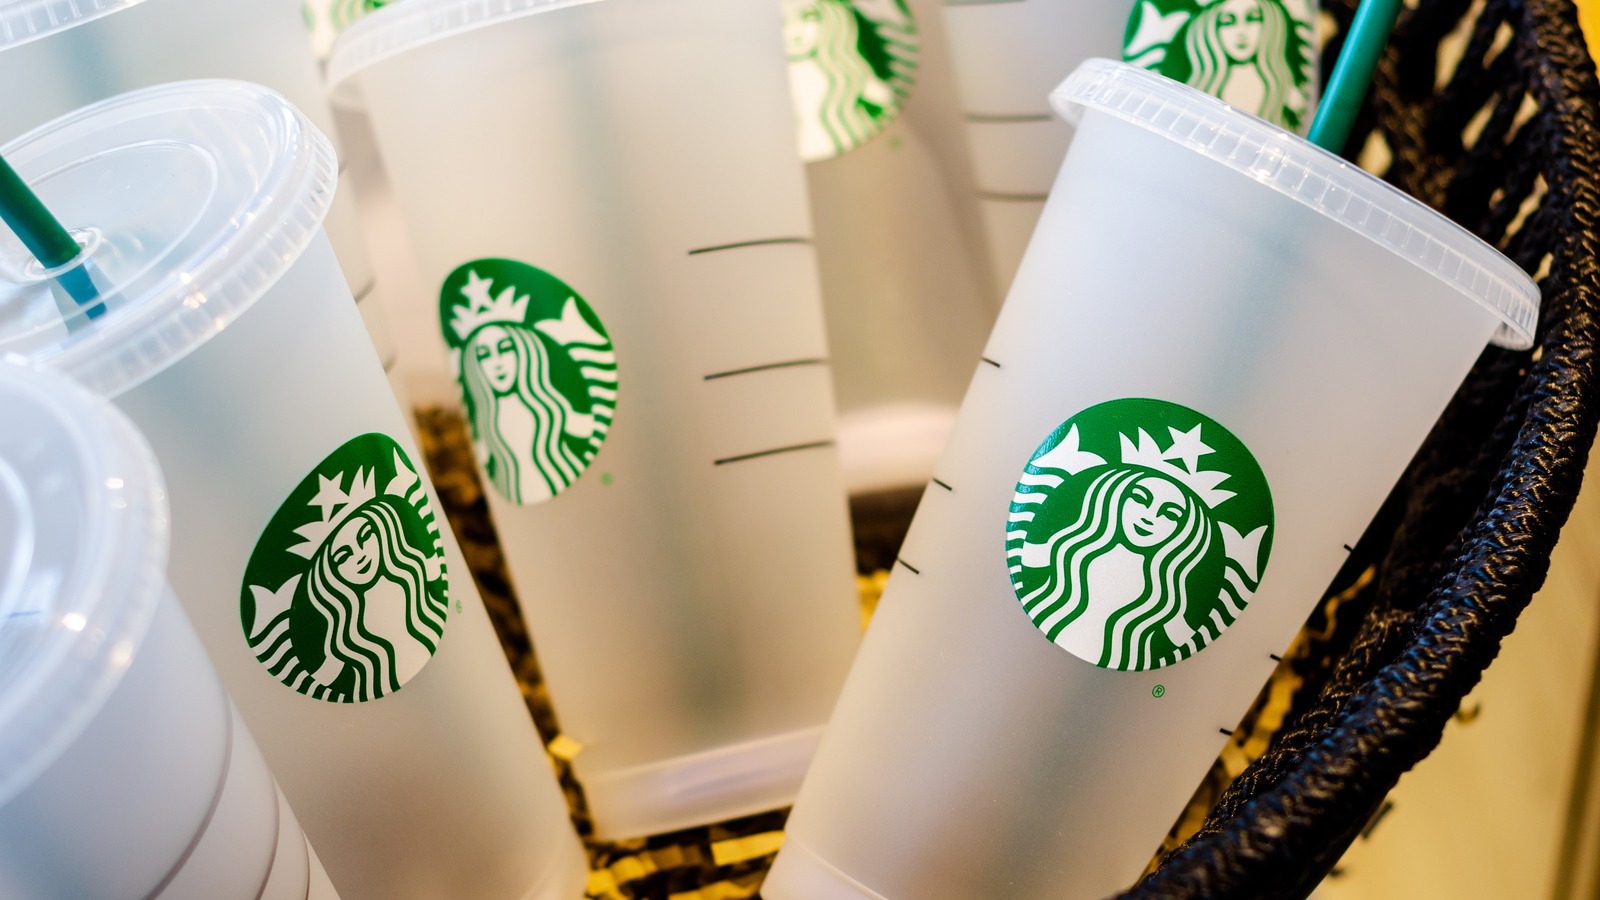 Starbucks Reusable Cups  How to Use Your Own Cup at Starbucks